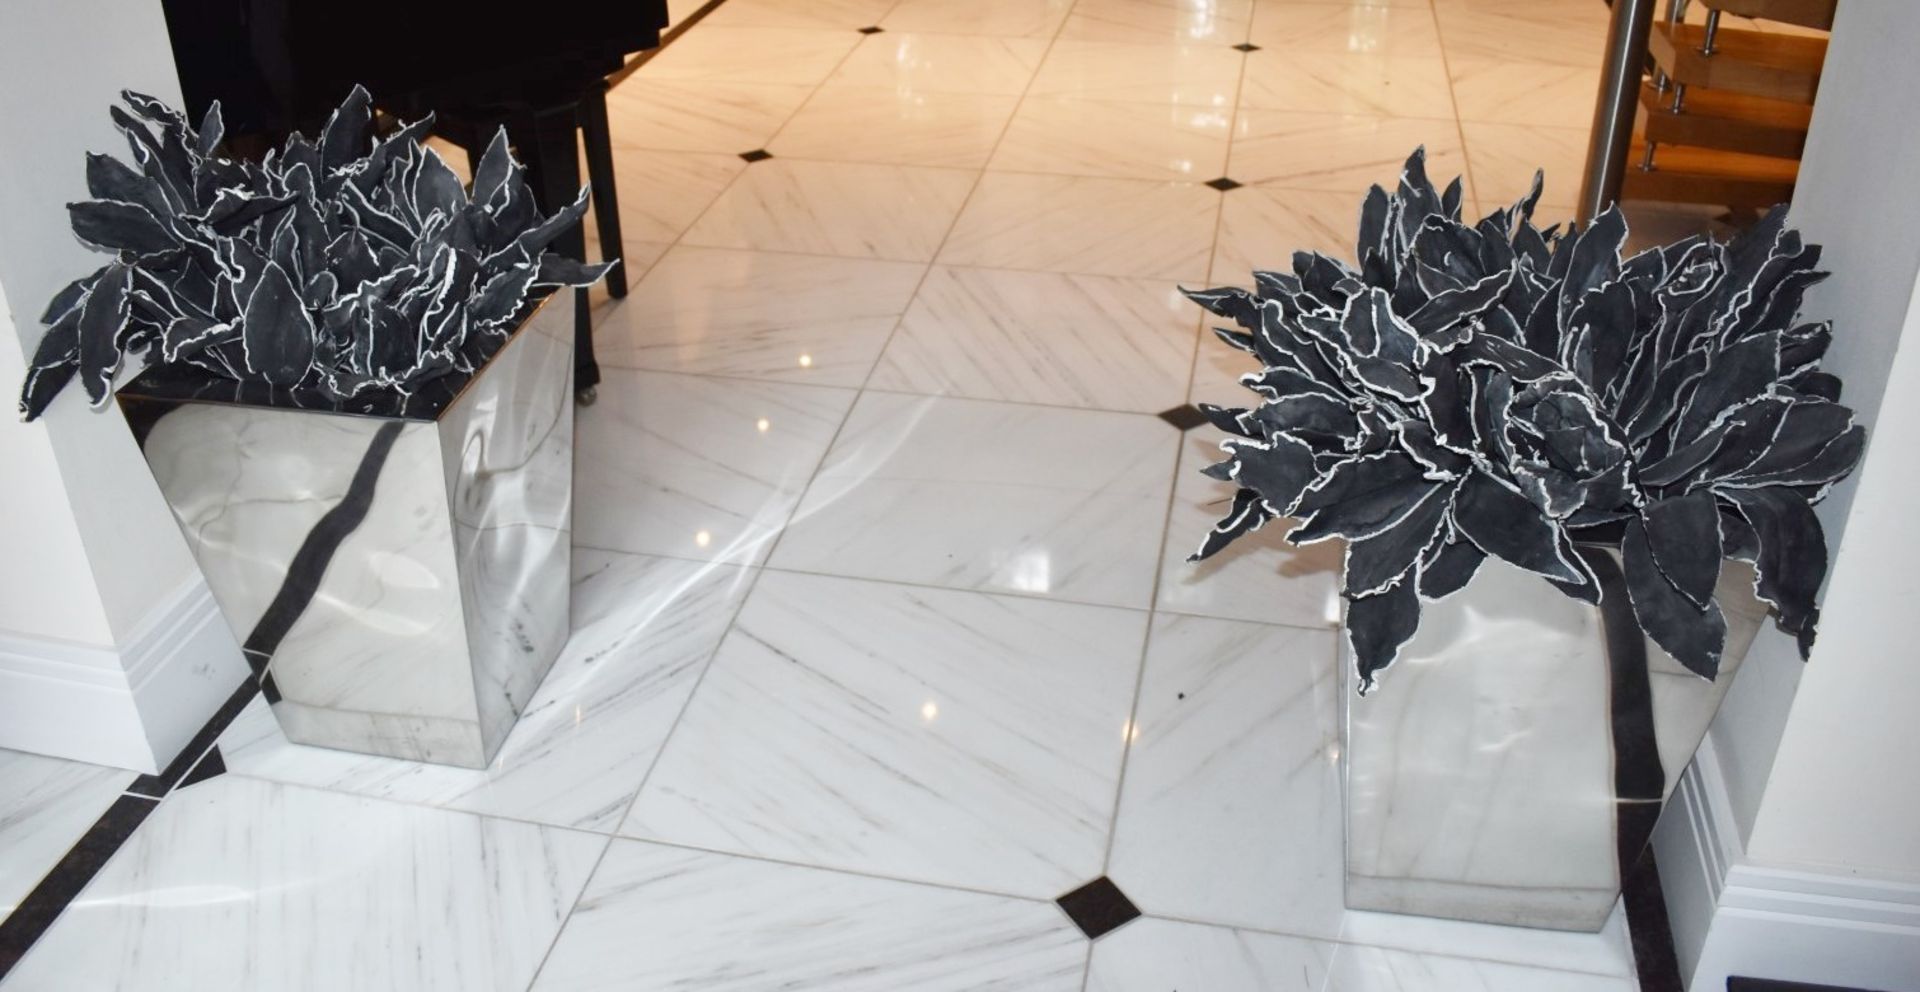 Pair of Decoration Chome Planters With Artificial Black Leaf Plants - Ideal For The Contemporary - Image 2 of 7